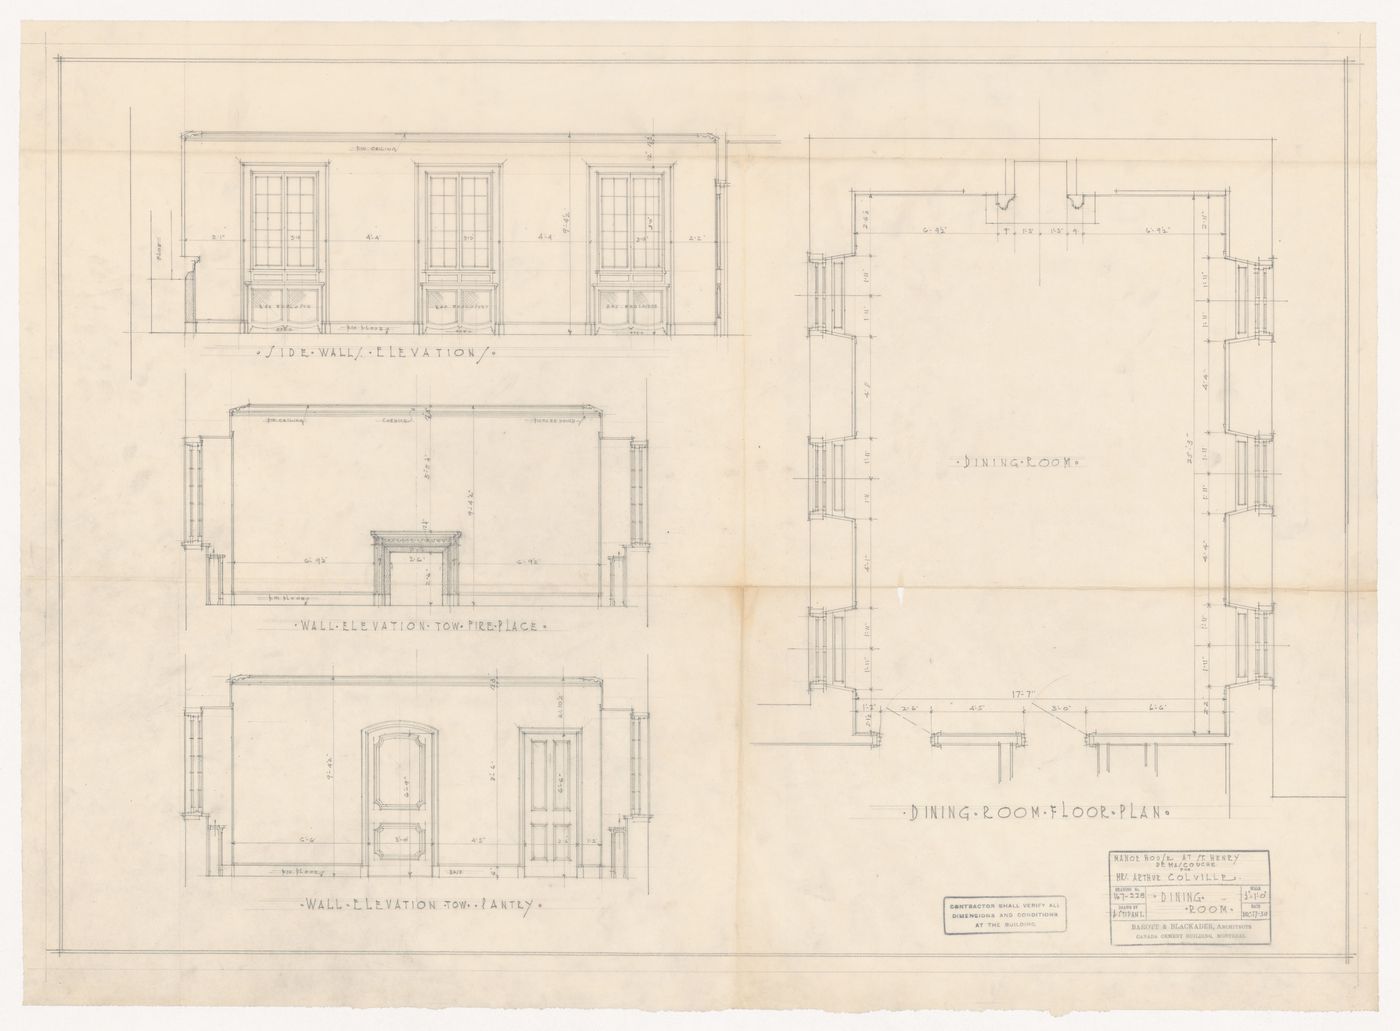 Plan and elevations of dining room for Colville Manor, Mascouche, Québec